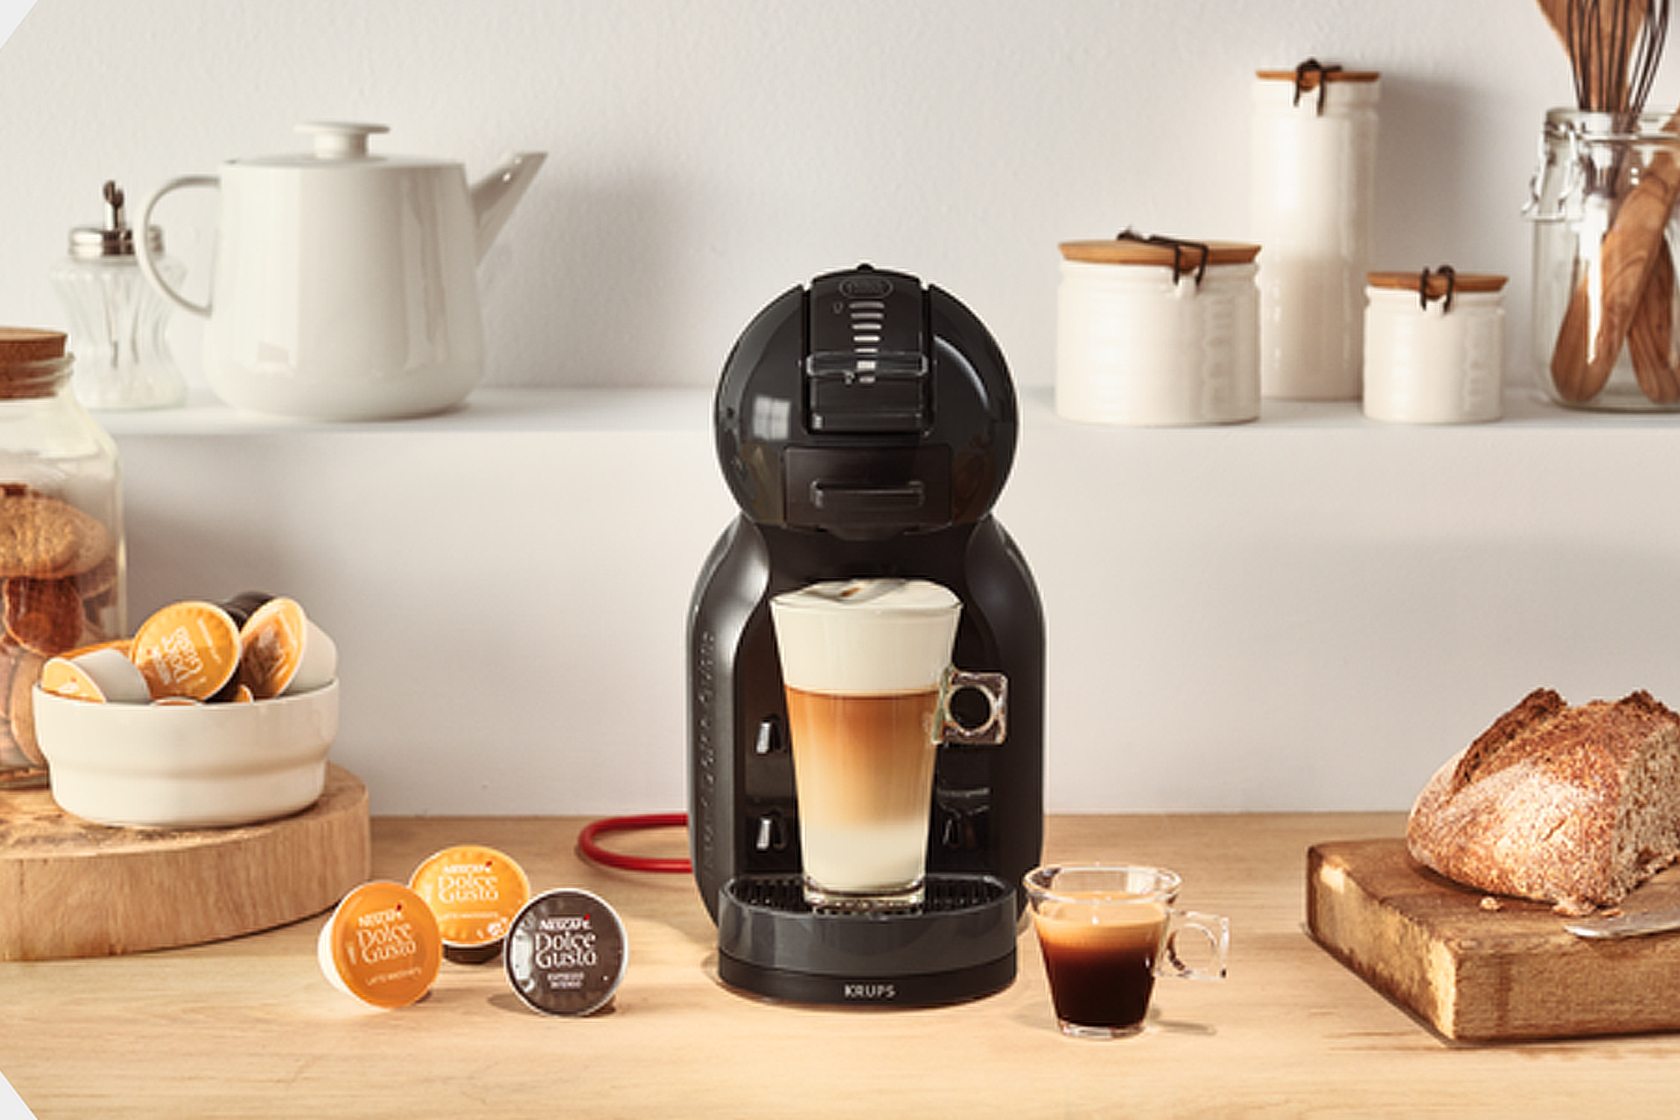 Dolce Gusto cappuccino